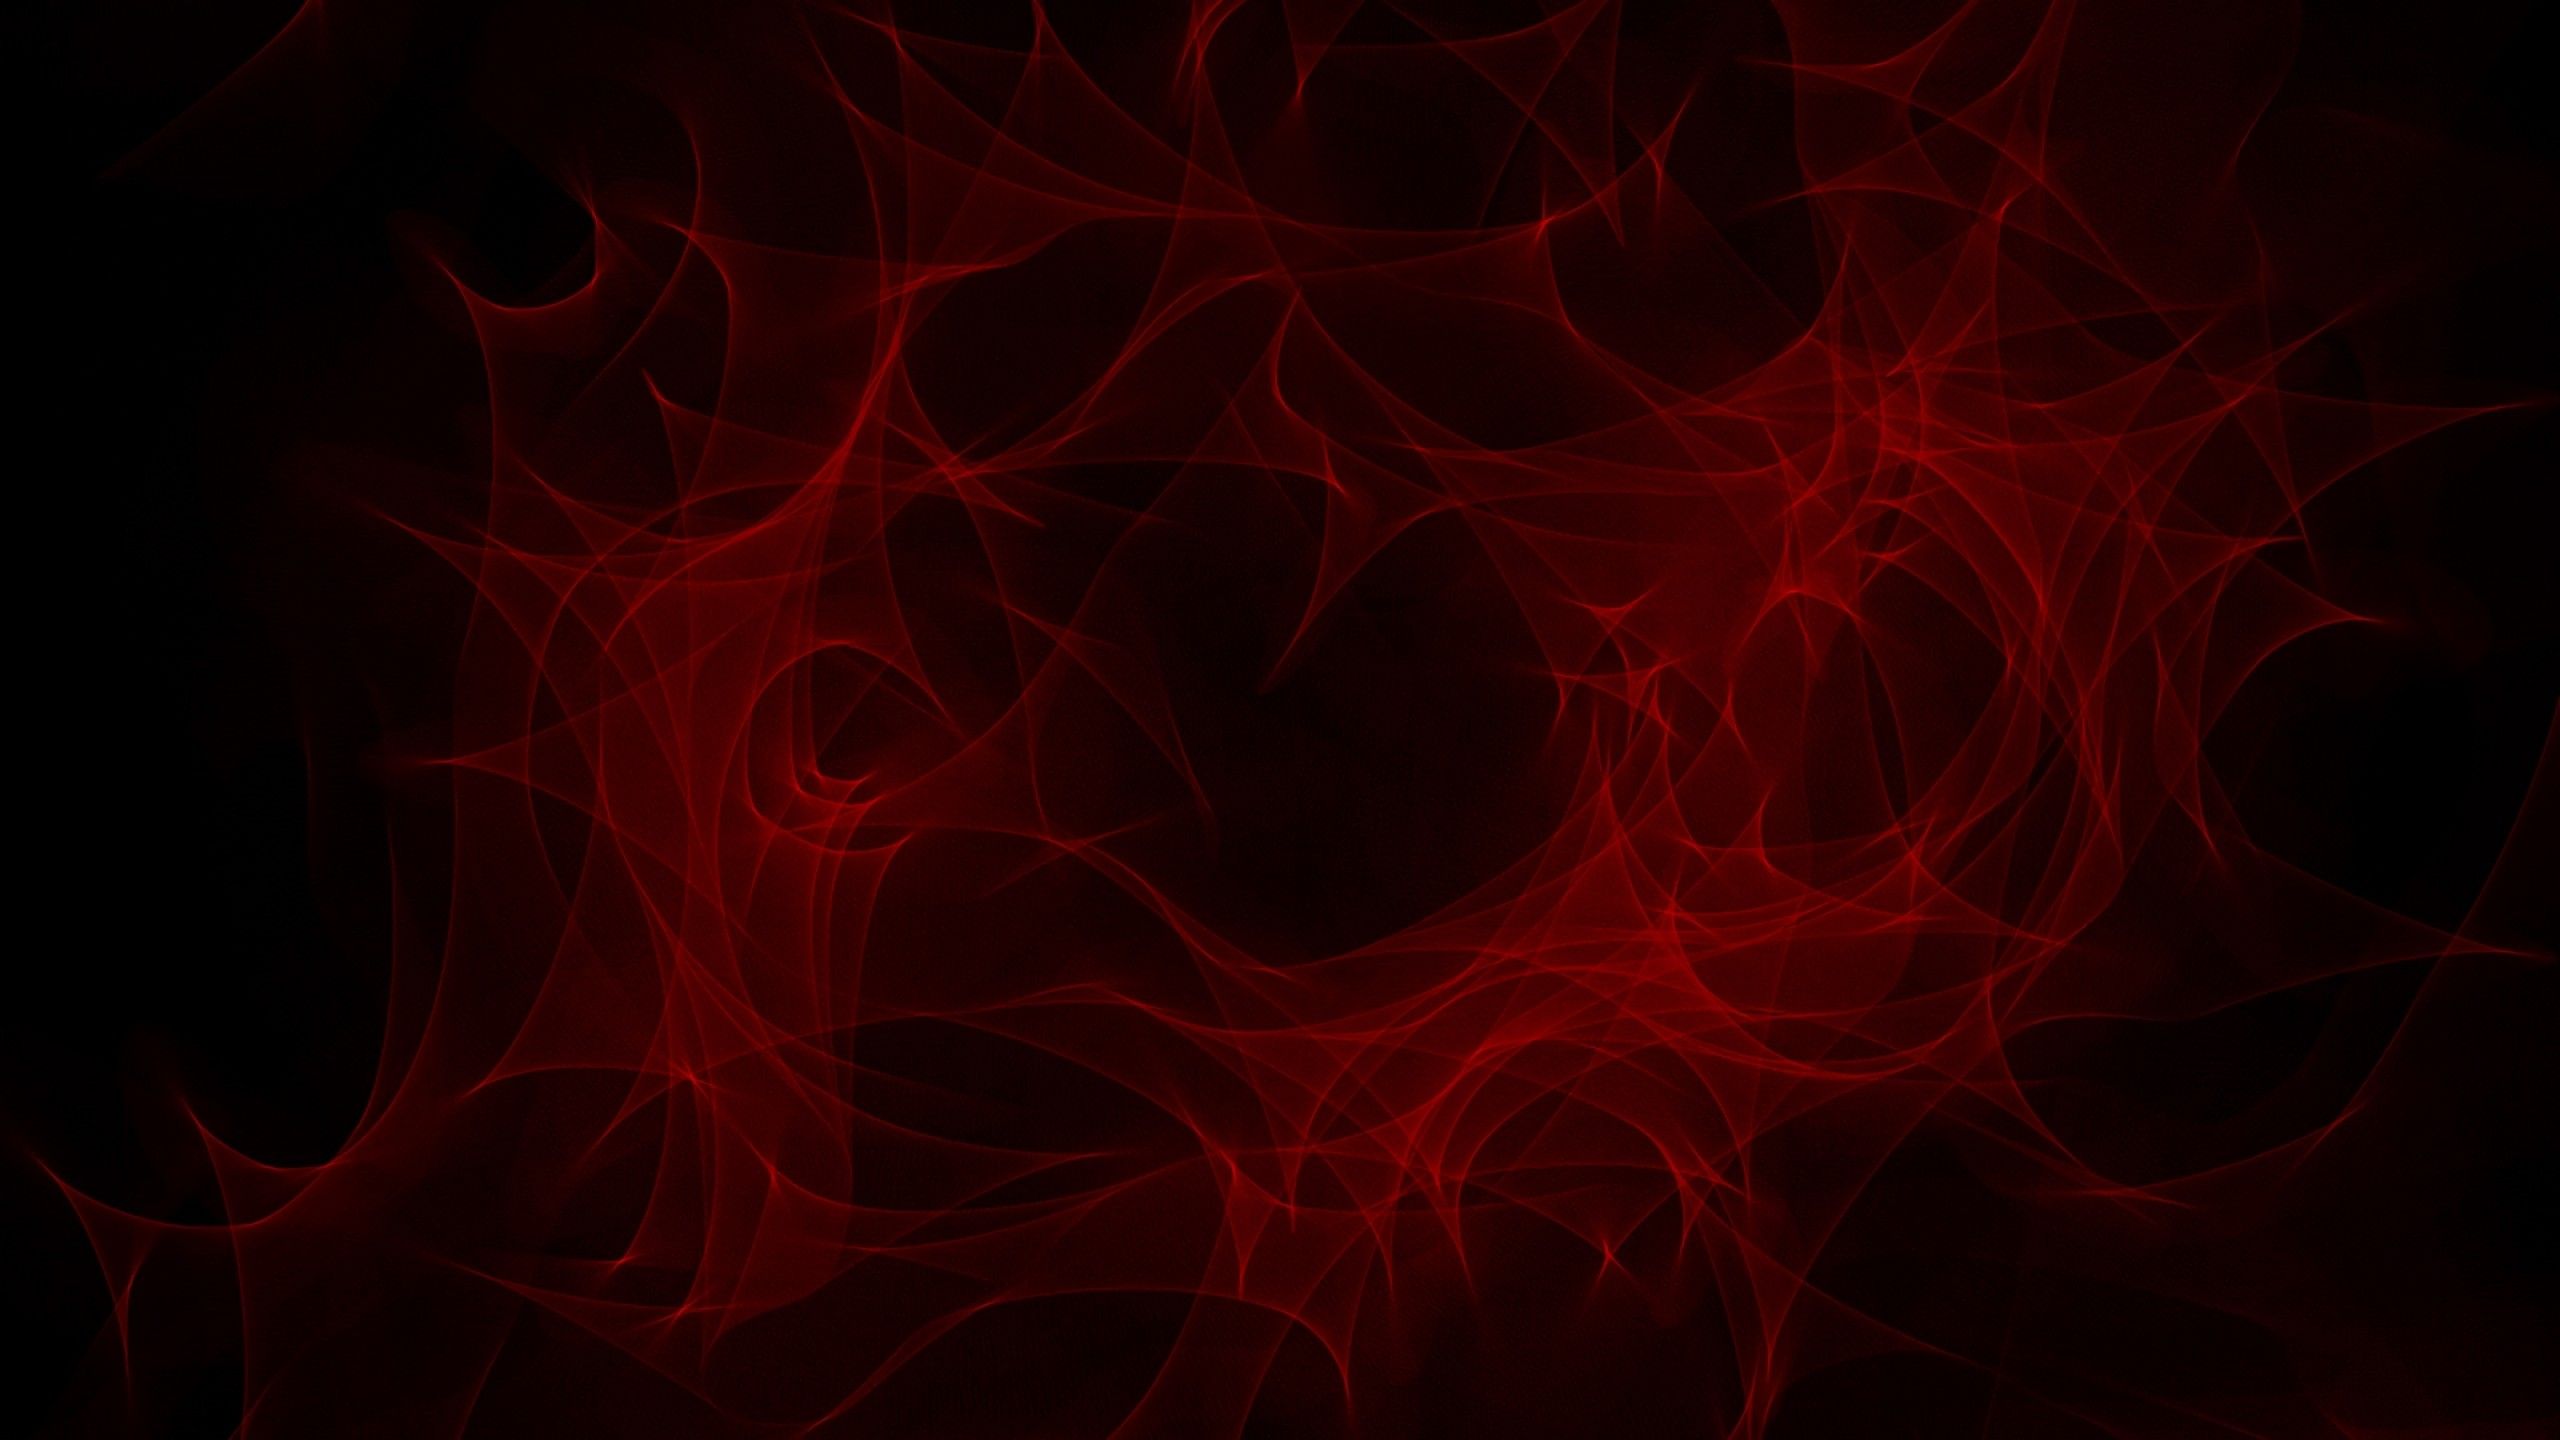 Red veil patterns HD Wallpaper Youtube Cover Photo